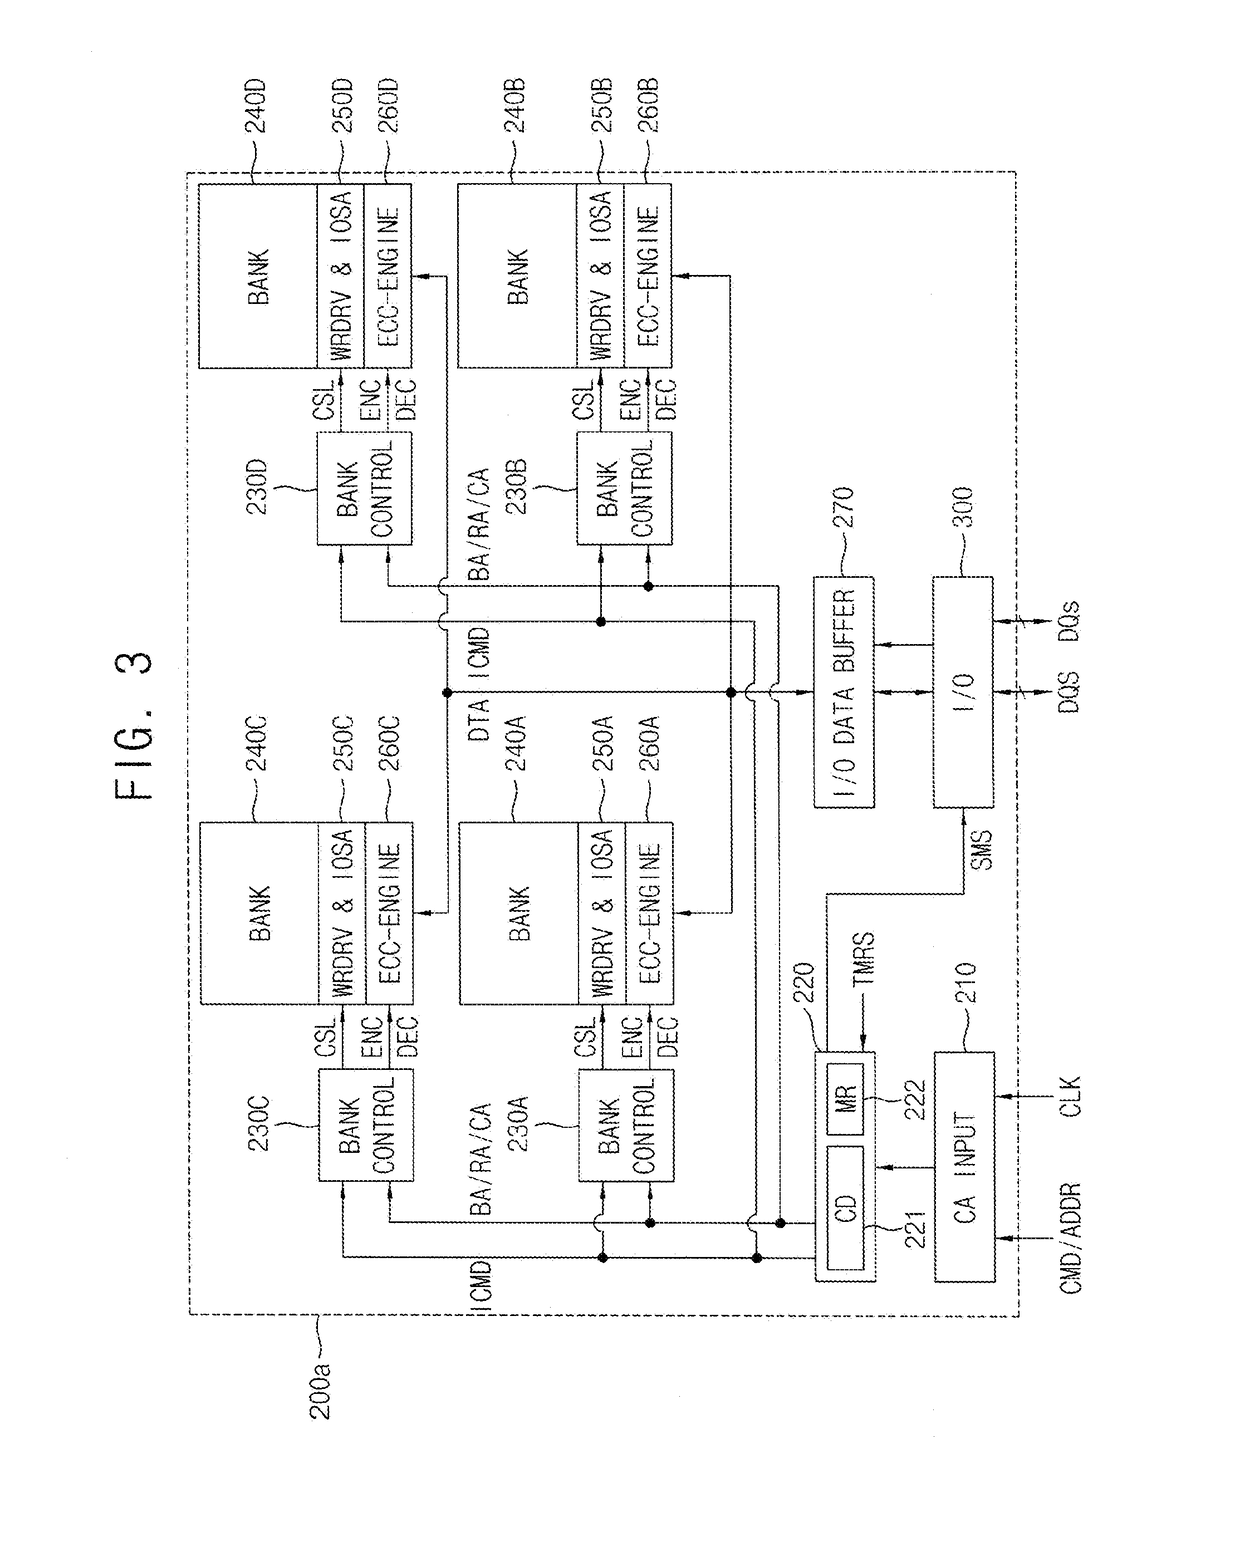 Semiconductor memory devices and methods of operating the same